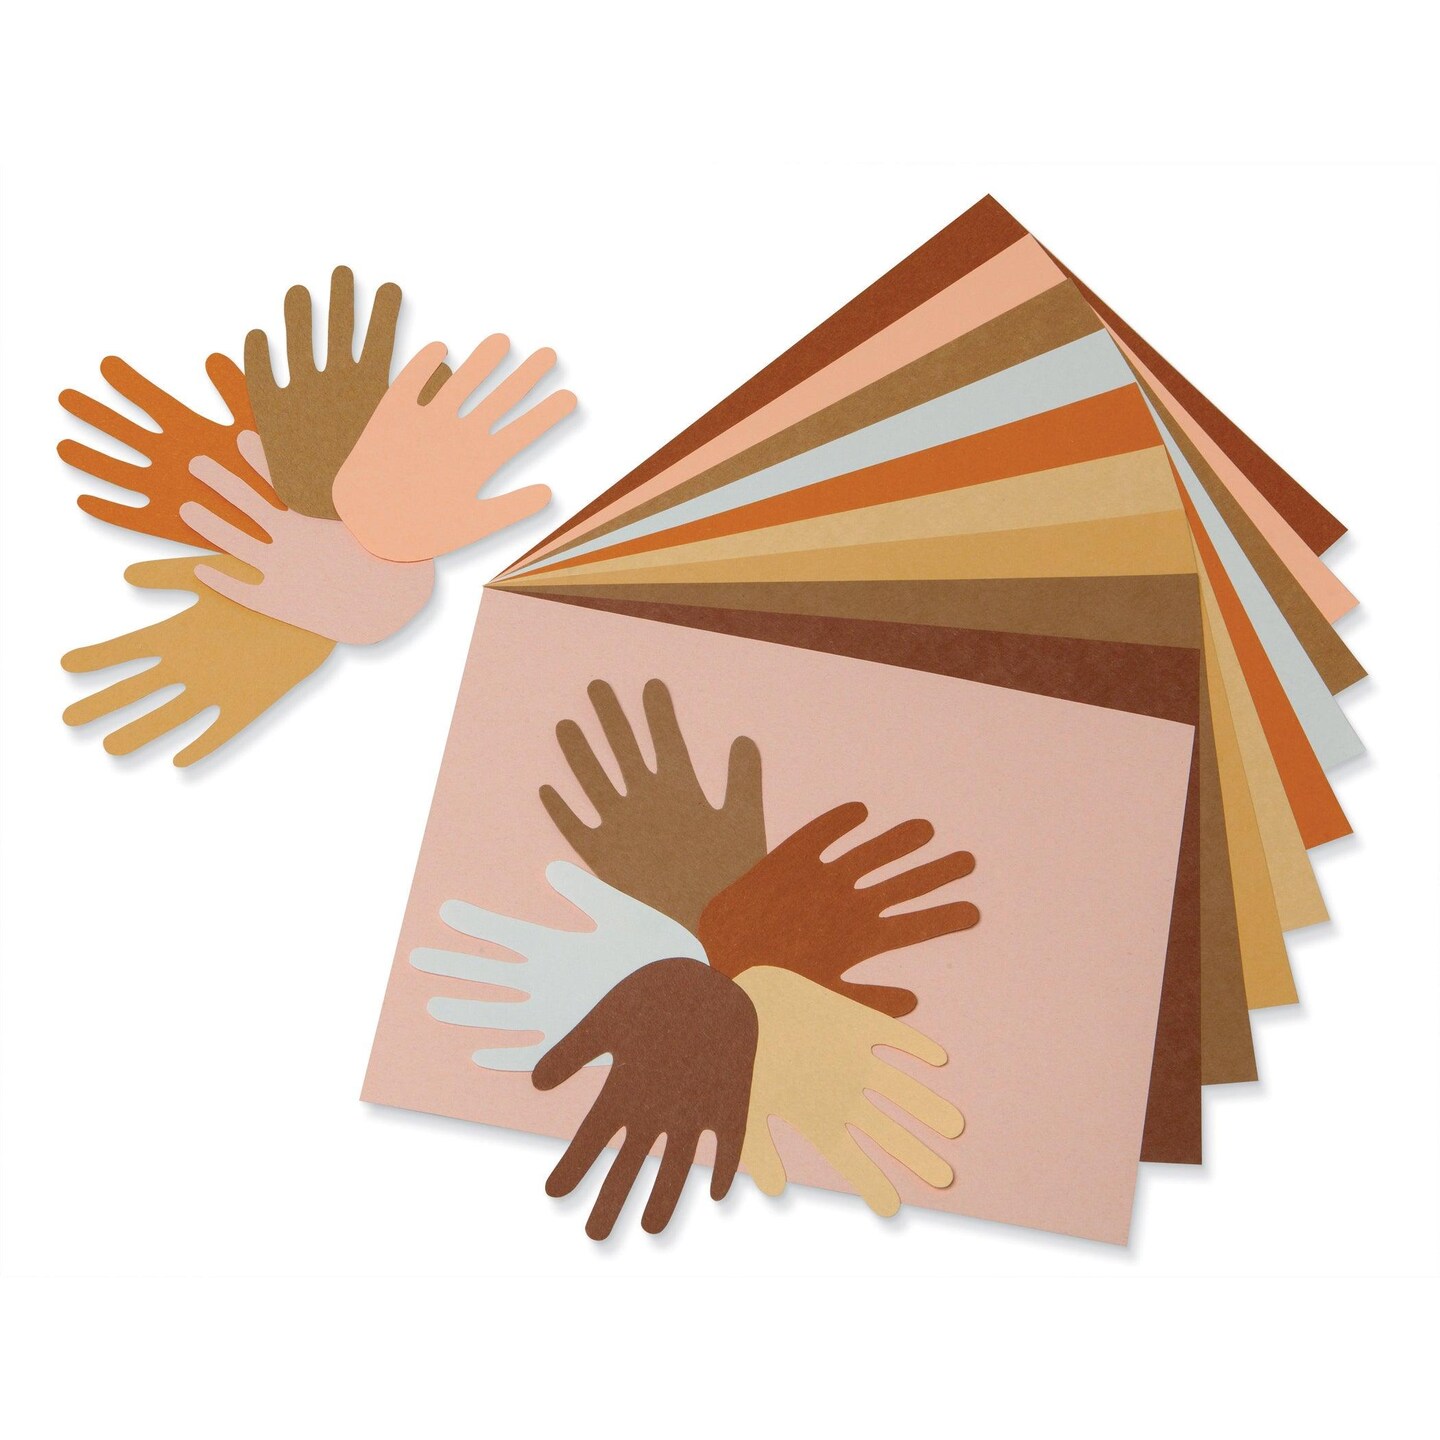 Shades of Me Construction Paper, 5 Assorted Skin Tone Colors, 9&#x22; x 12&#x22;, 50 Sheets Per Pack, 5 Packs